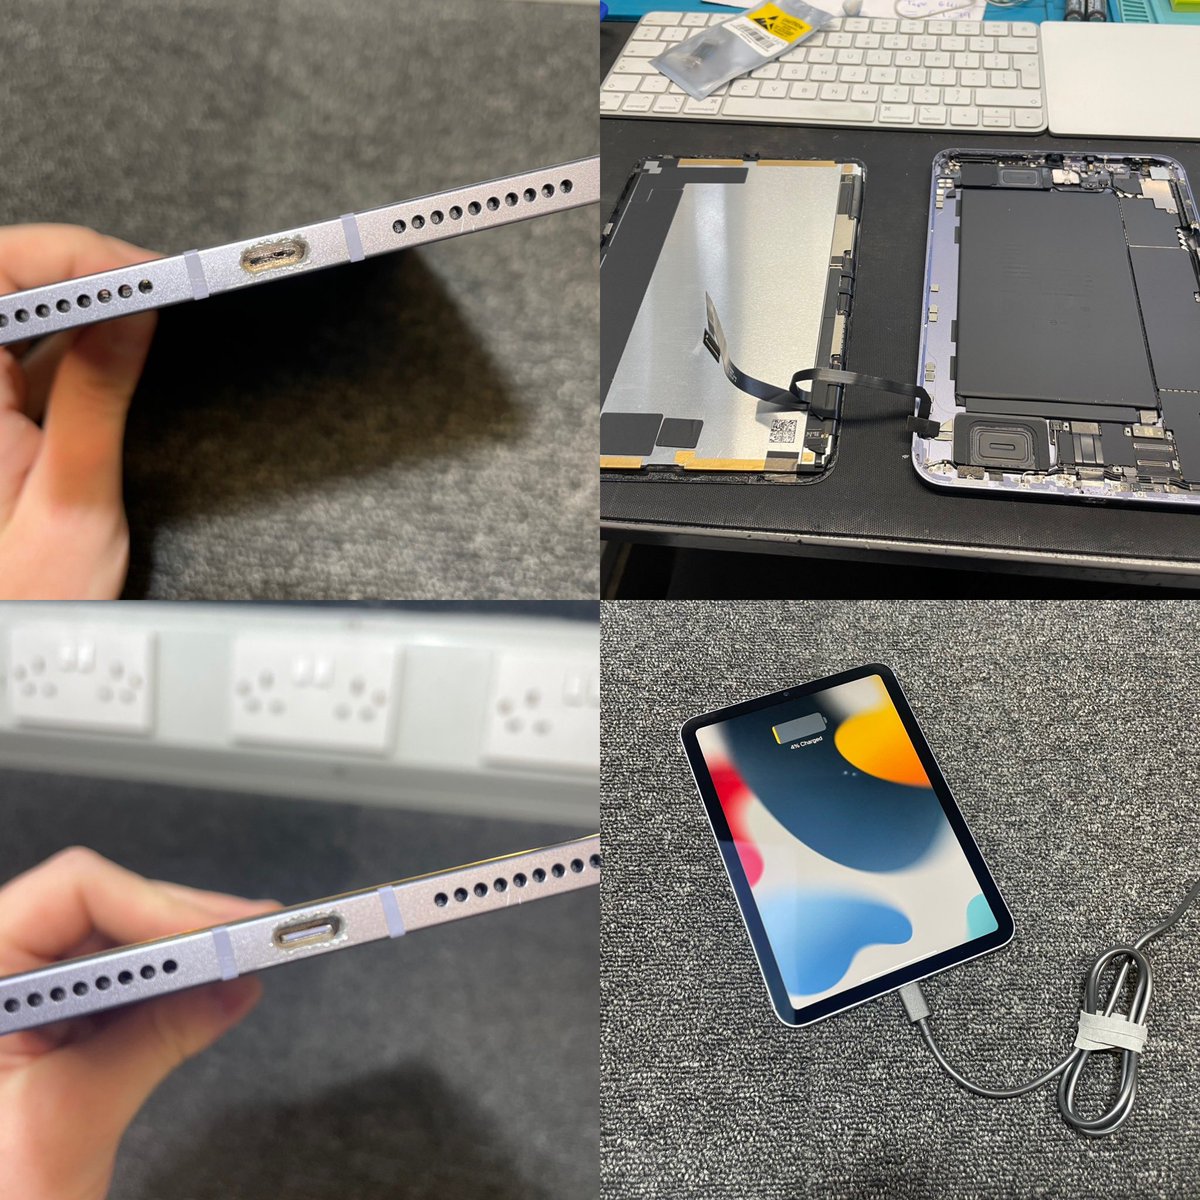 🔧 iPad Charger Port Replaced! 🔧
Exciting news at RL TechExchange! Our latest achievement: successfully replaced the charger port on an iPad Mini 6th Gen. Enjoy hassle-free charging! #iPadRepair #ChargerPortReplacement #RLTechExchange 🛠️📱✨